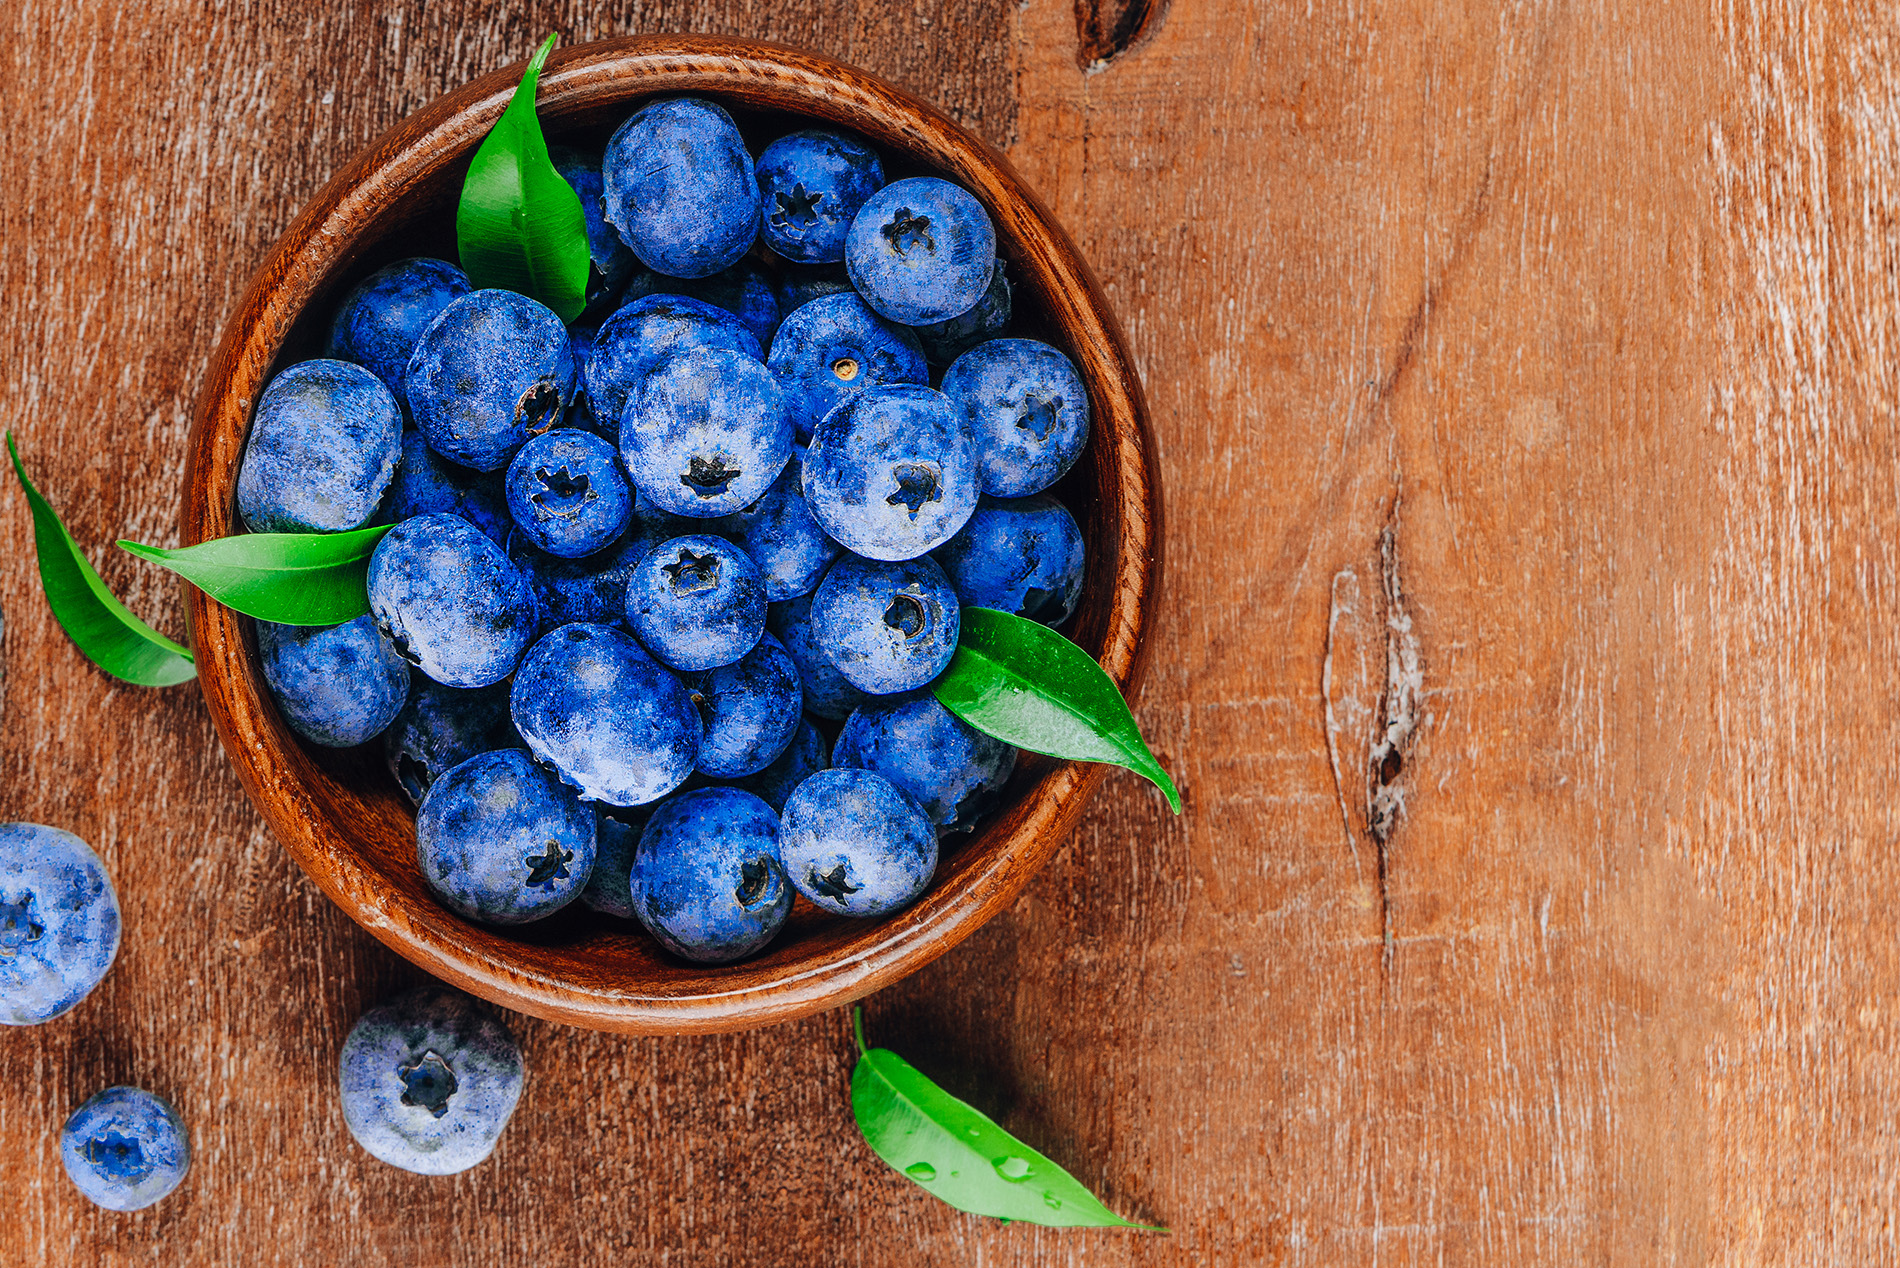 Bowl of blueberries on a wooden board